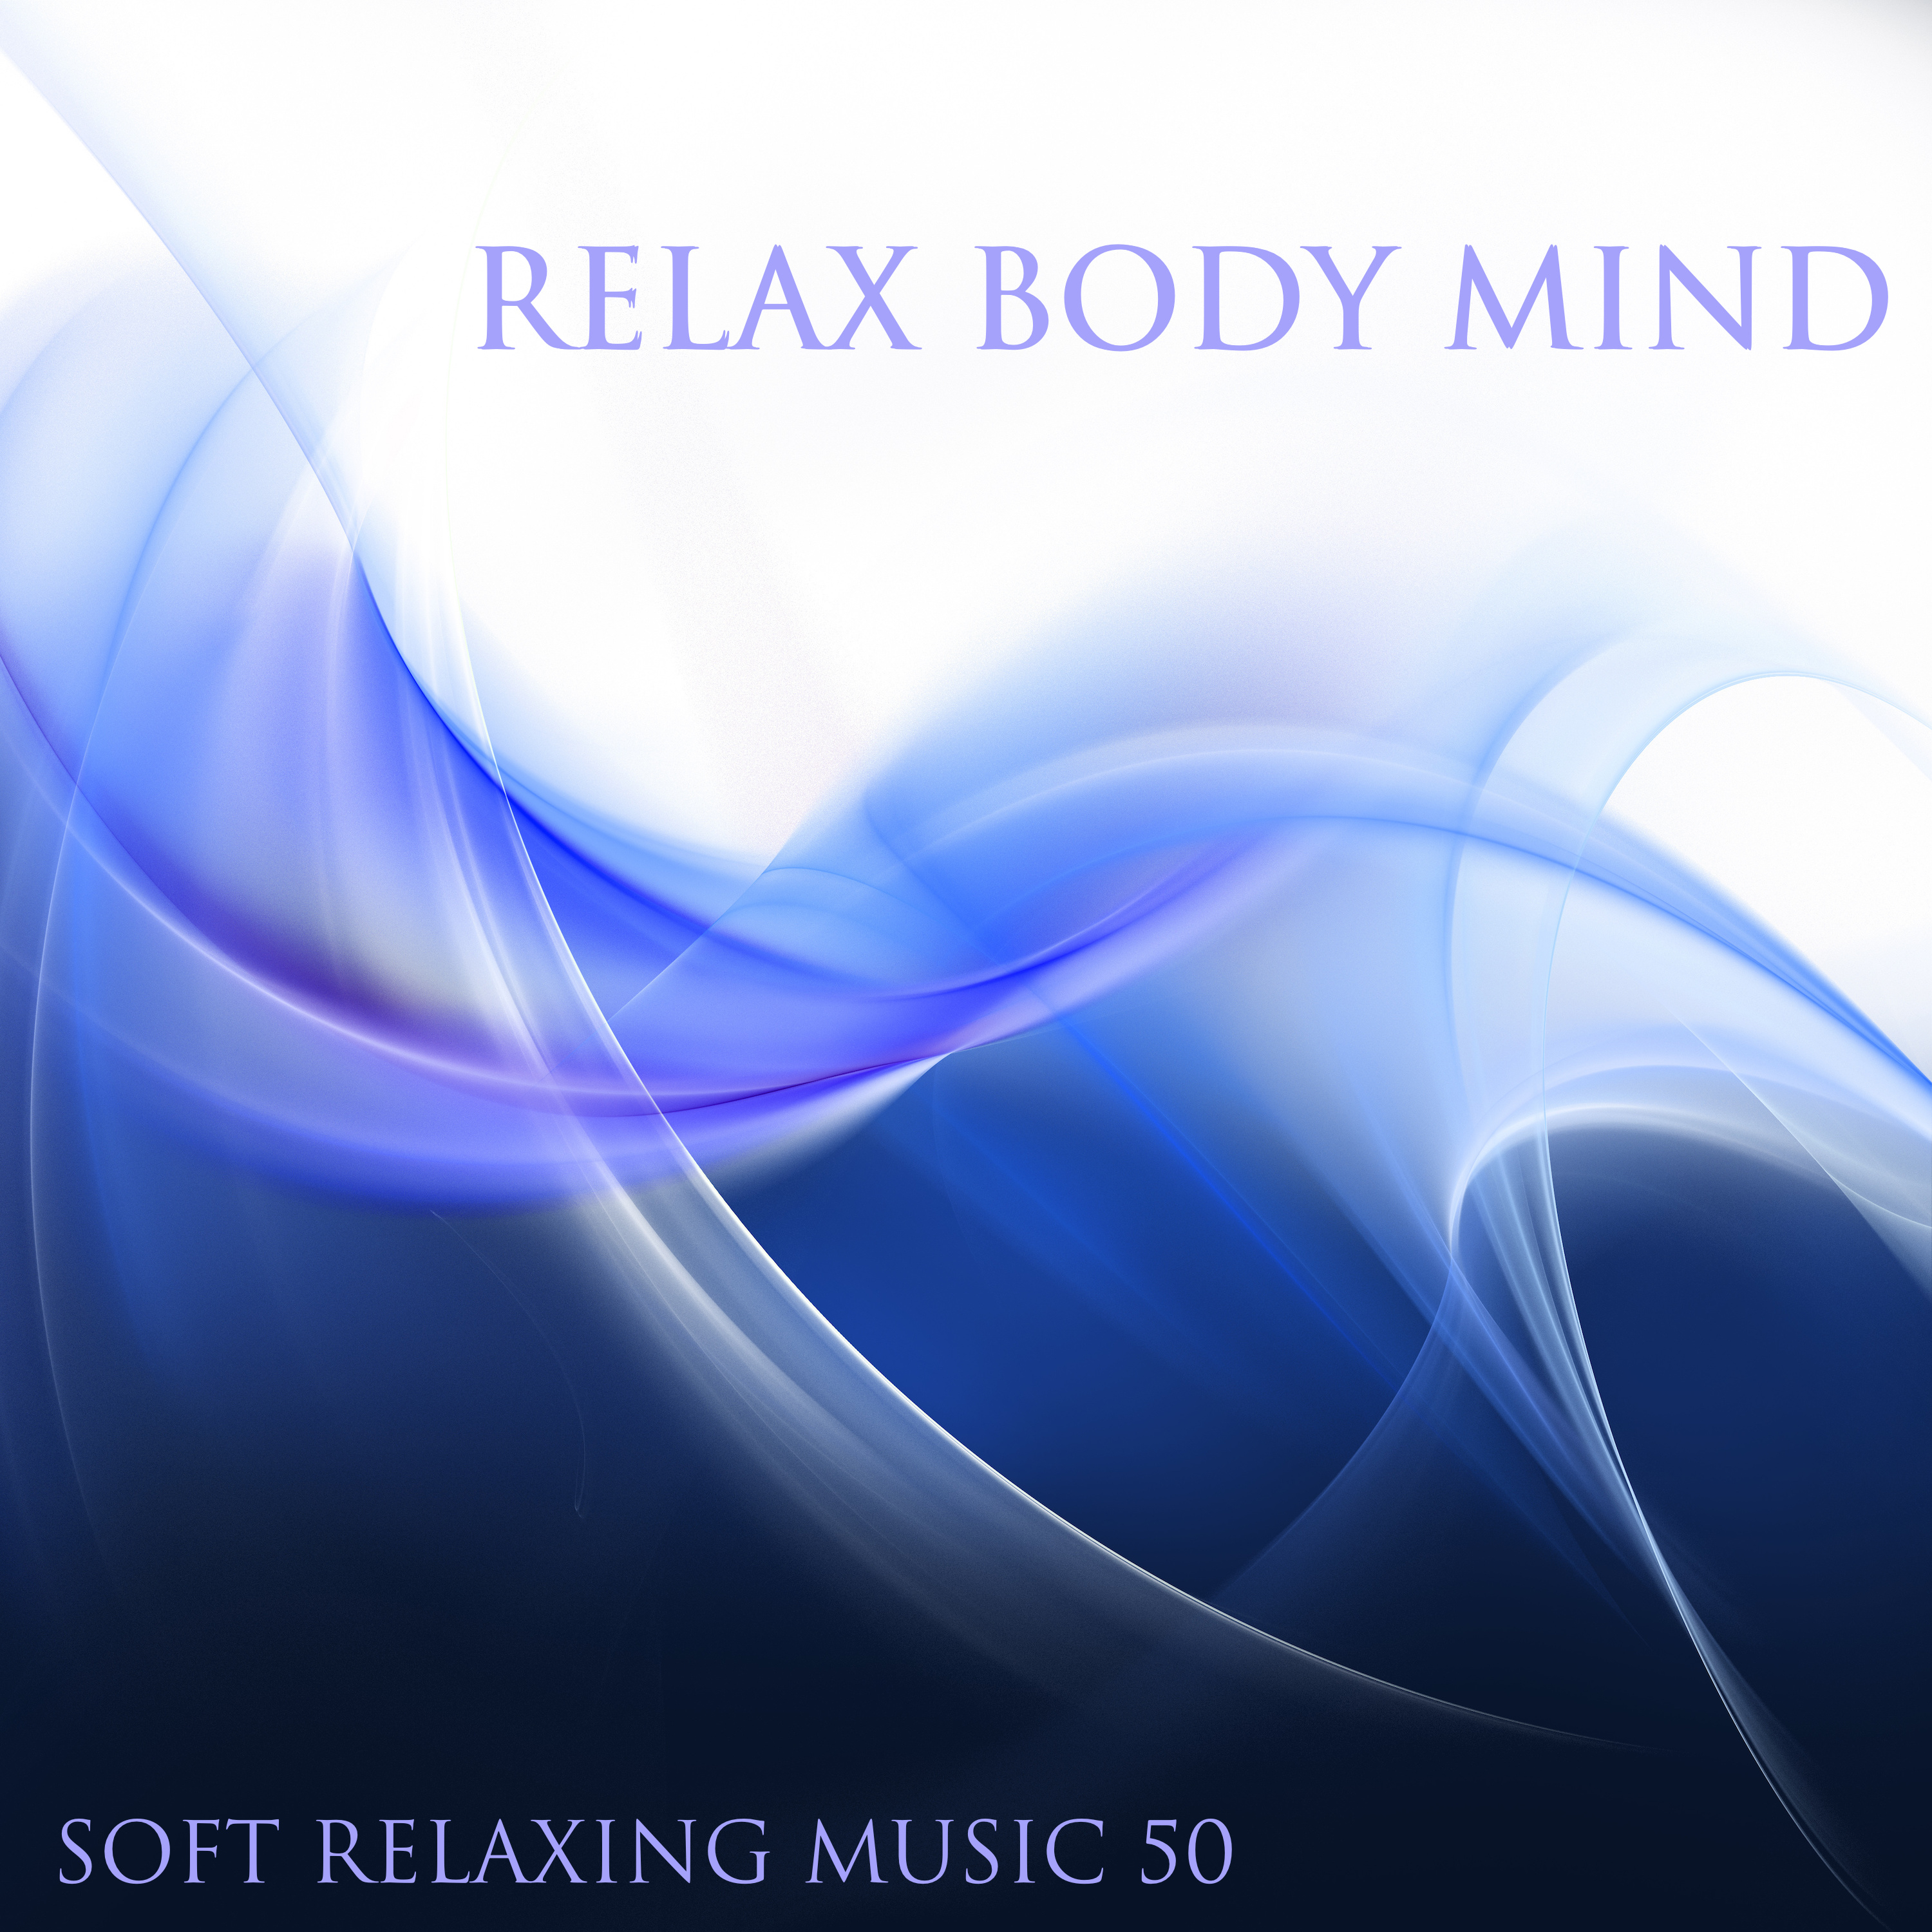 Relax Body Mind Soft Relaxing Music 50 - Gentle Songs for Deep Relaxation, Meditation & Spa